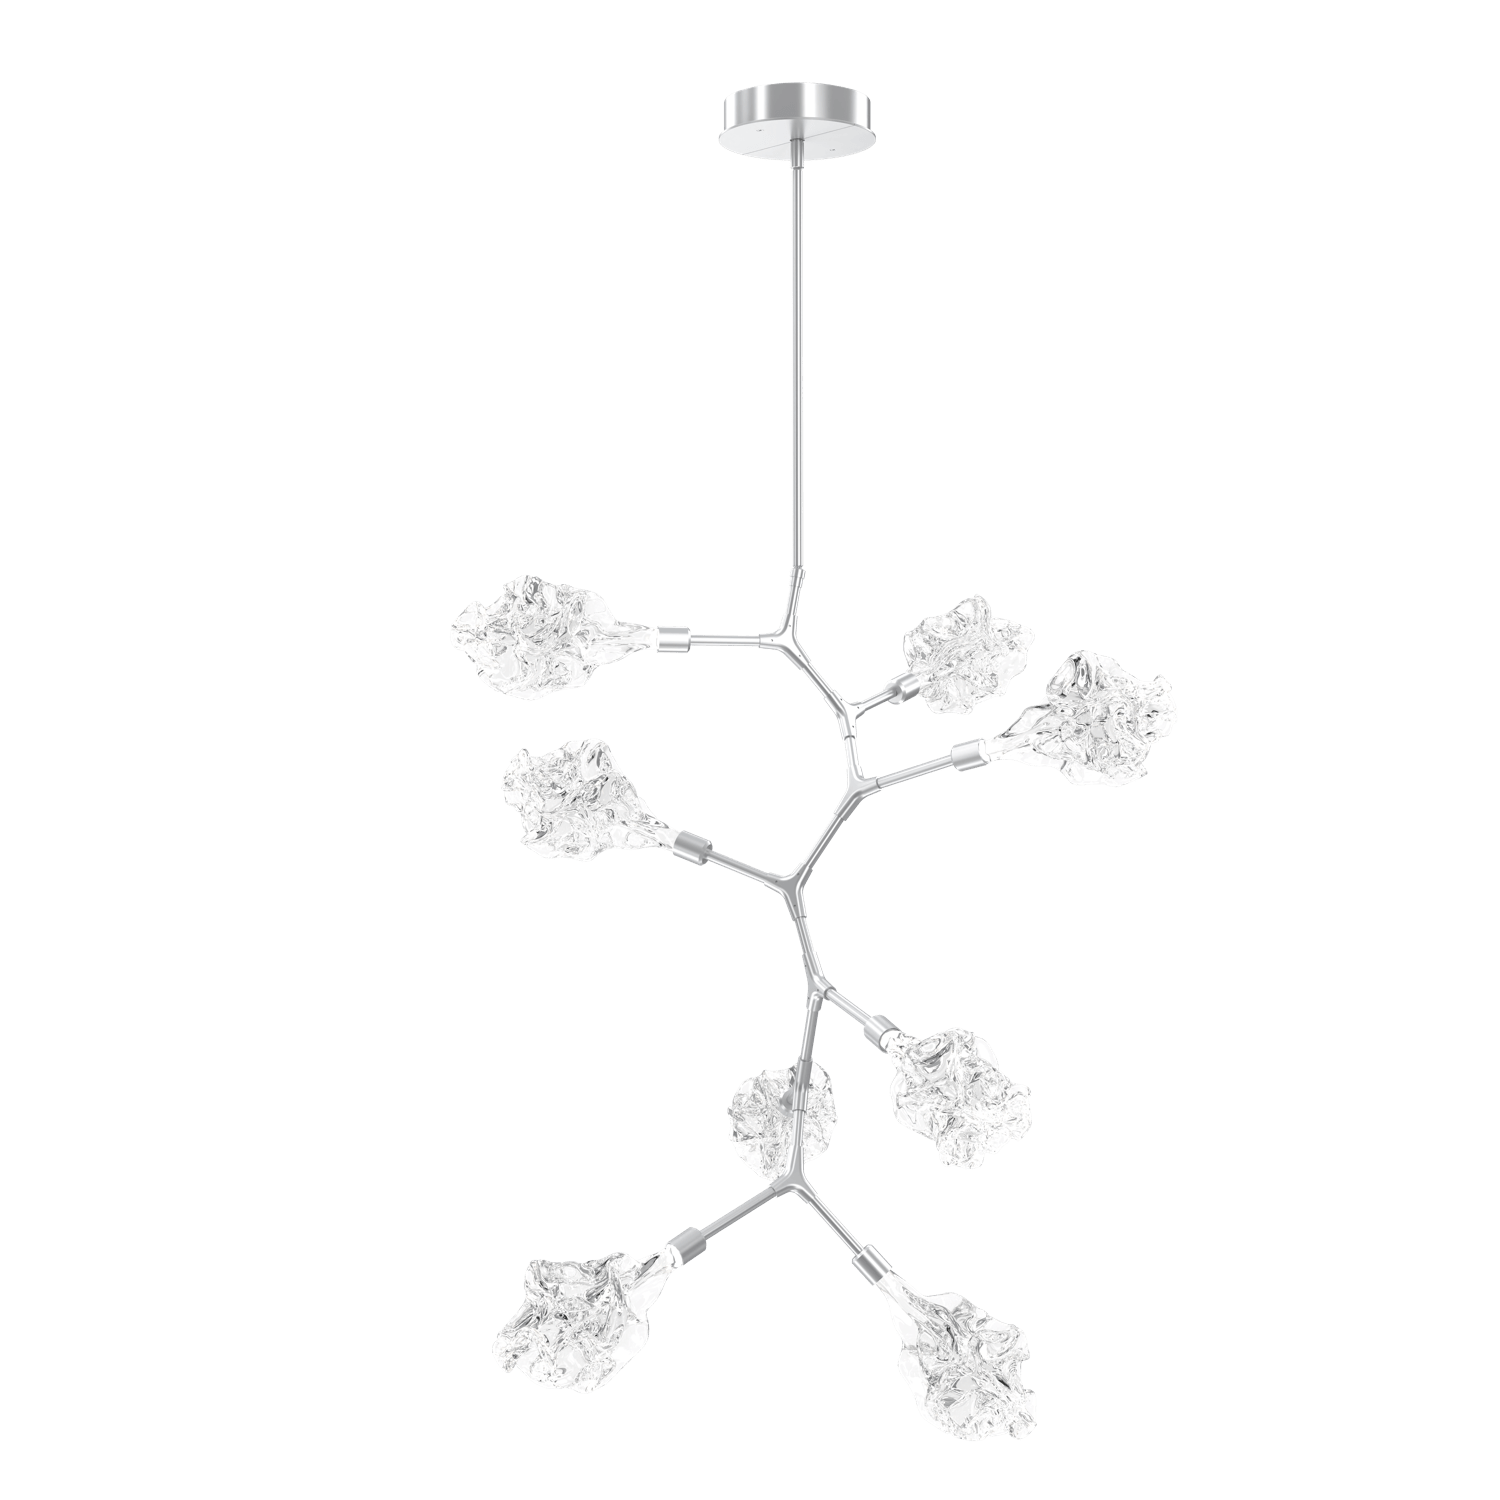 CHB0059-VB-CS-Hammerton-Studio-Blossom-8-light-organic-vine-chandelier-with-classic-silver-finish-and-clear-handblown-crystal-glass-shades-and-LED-lamping